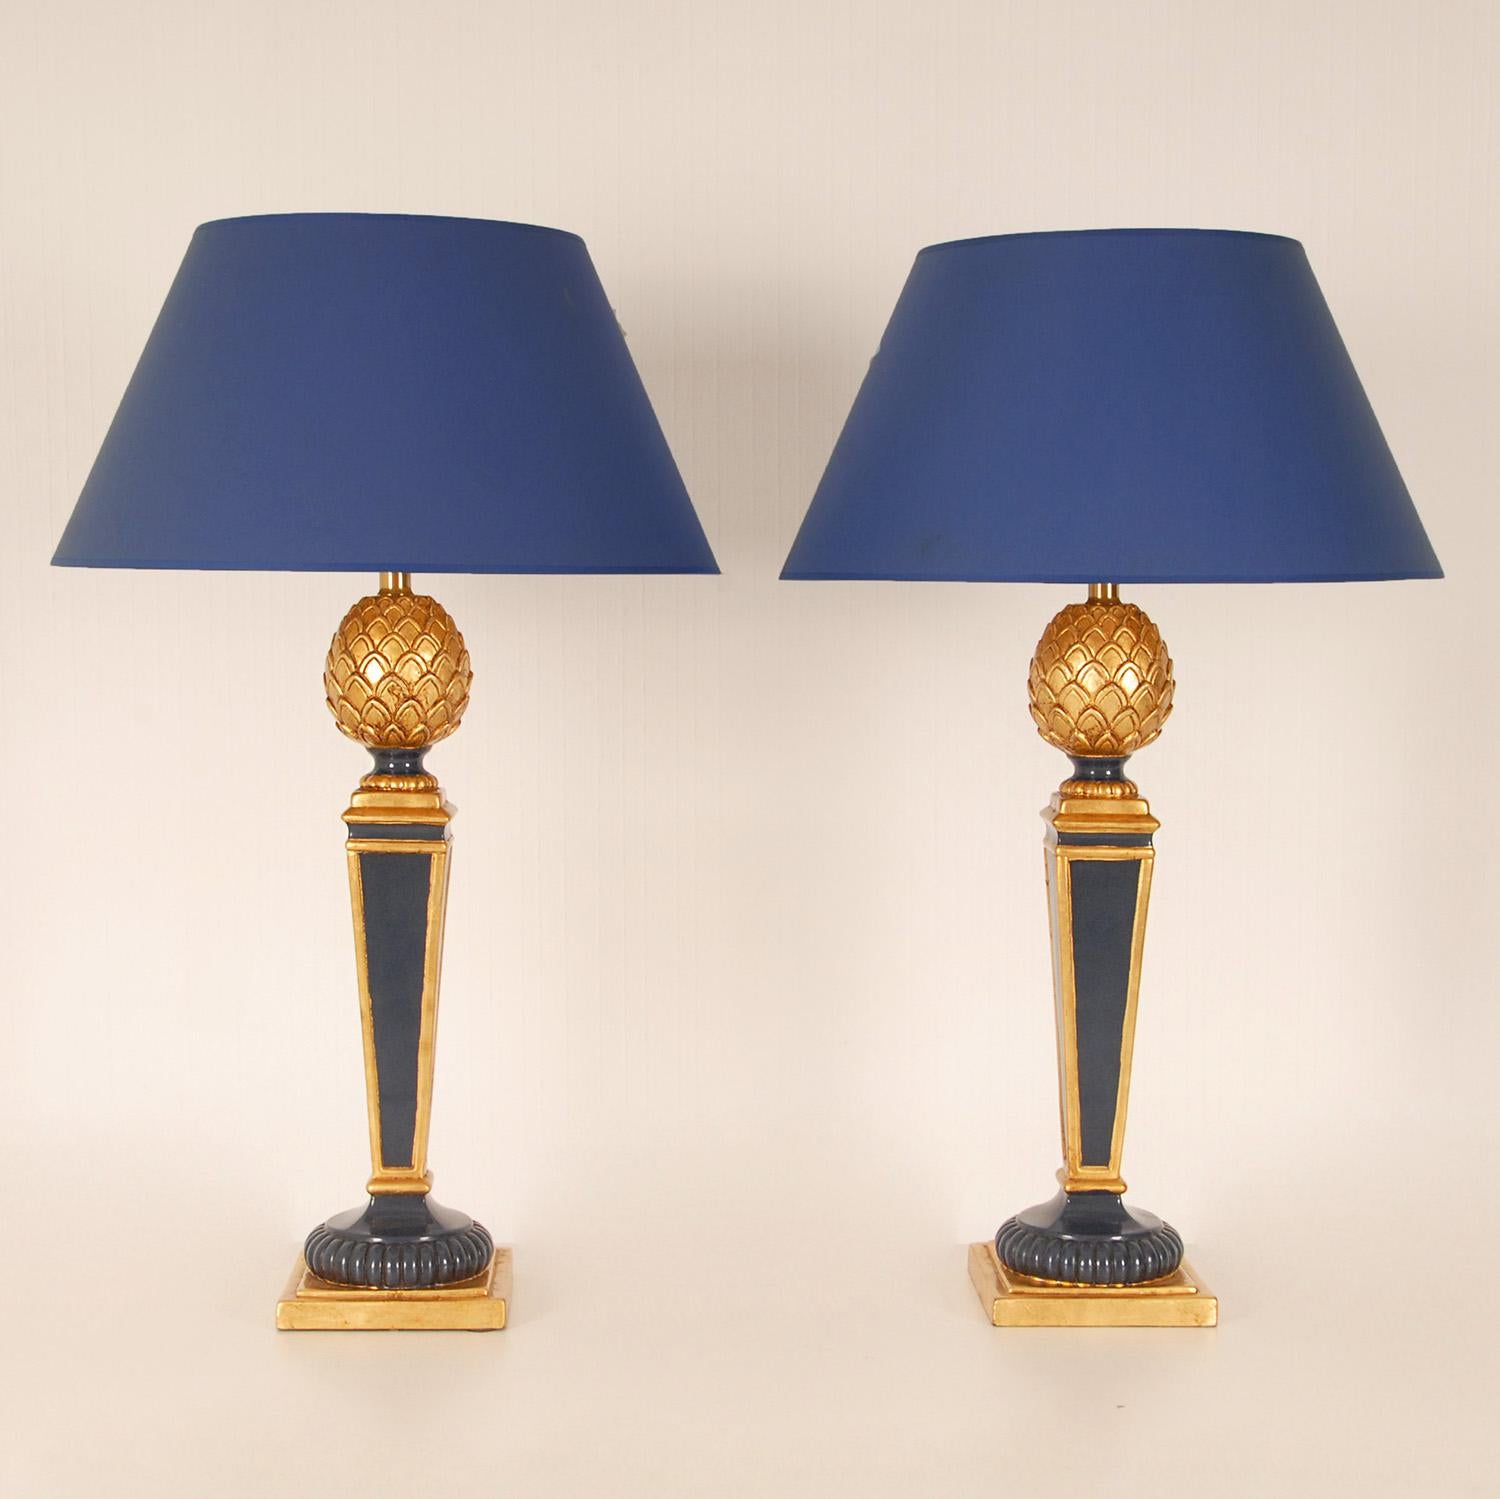 Vintage French High End Lamps Blue Gold Giltwood Pineapple Table Lamps, a Pair For Sale 4